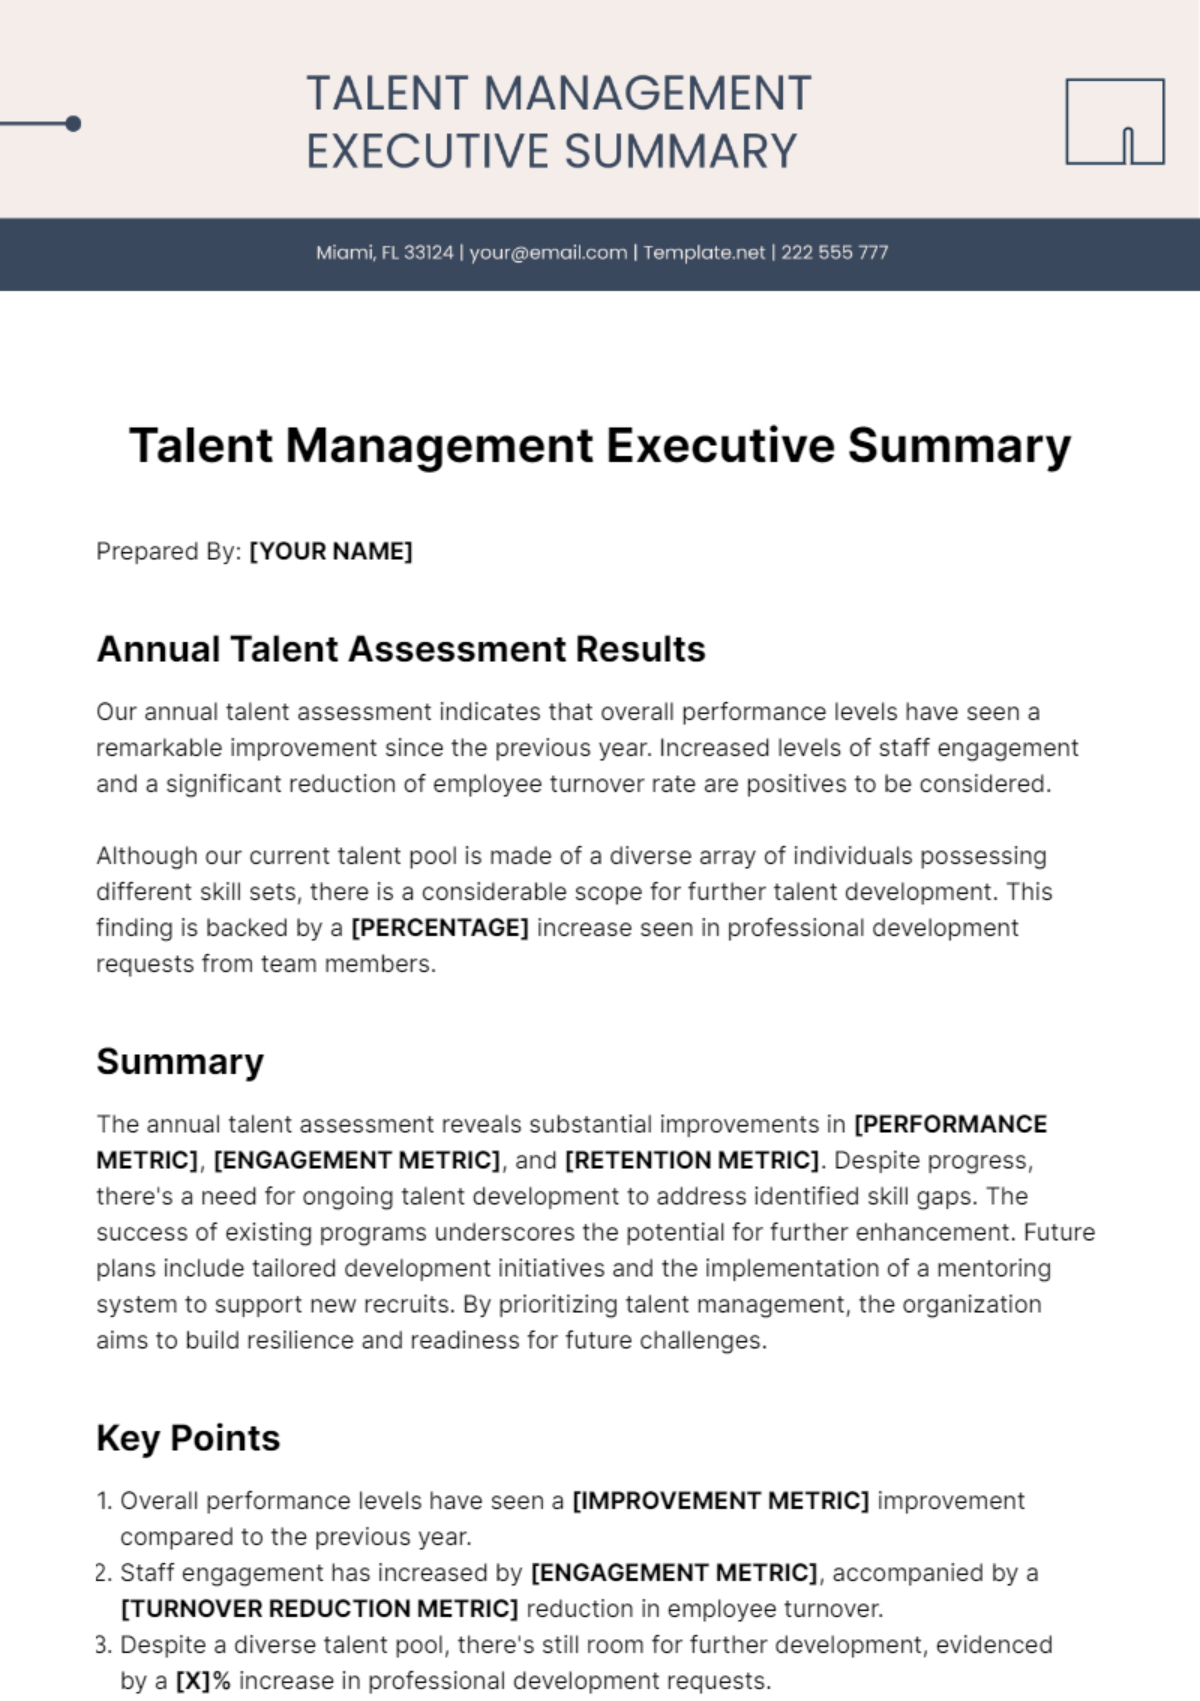 Talent Management Executive Summary Template